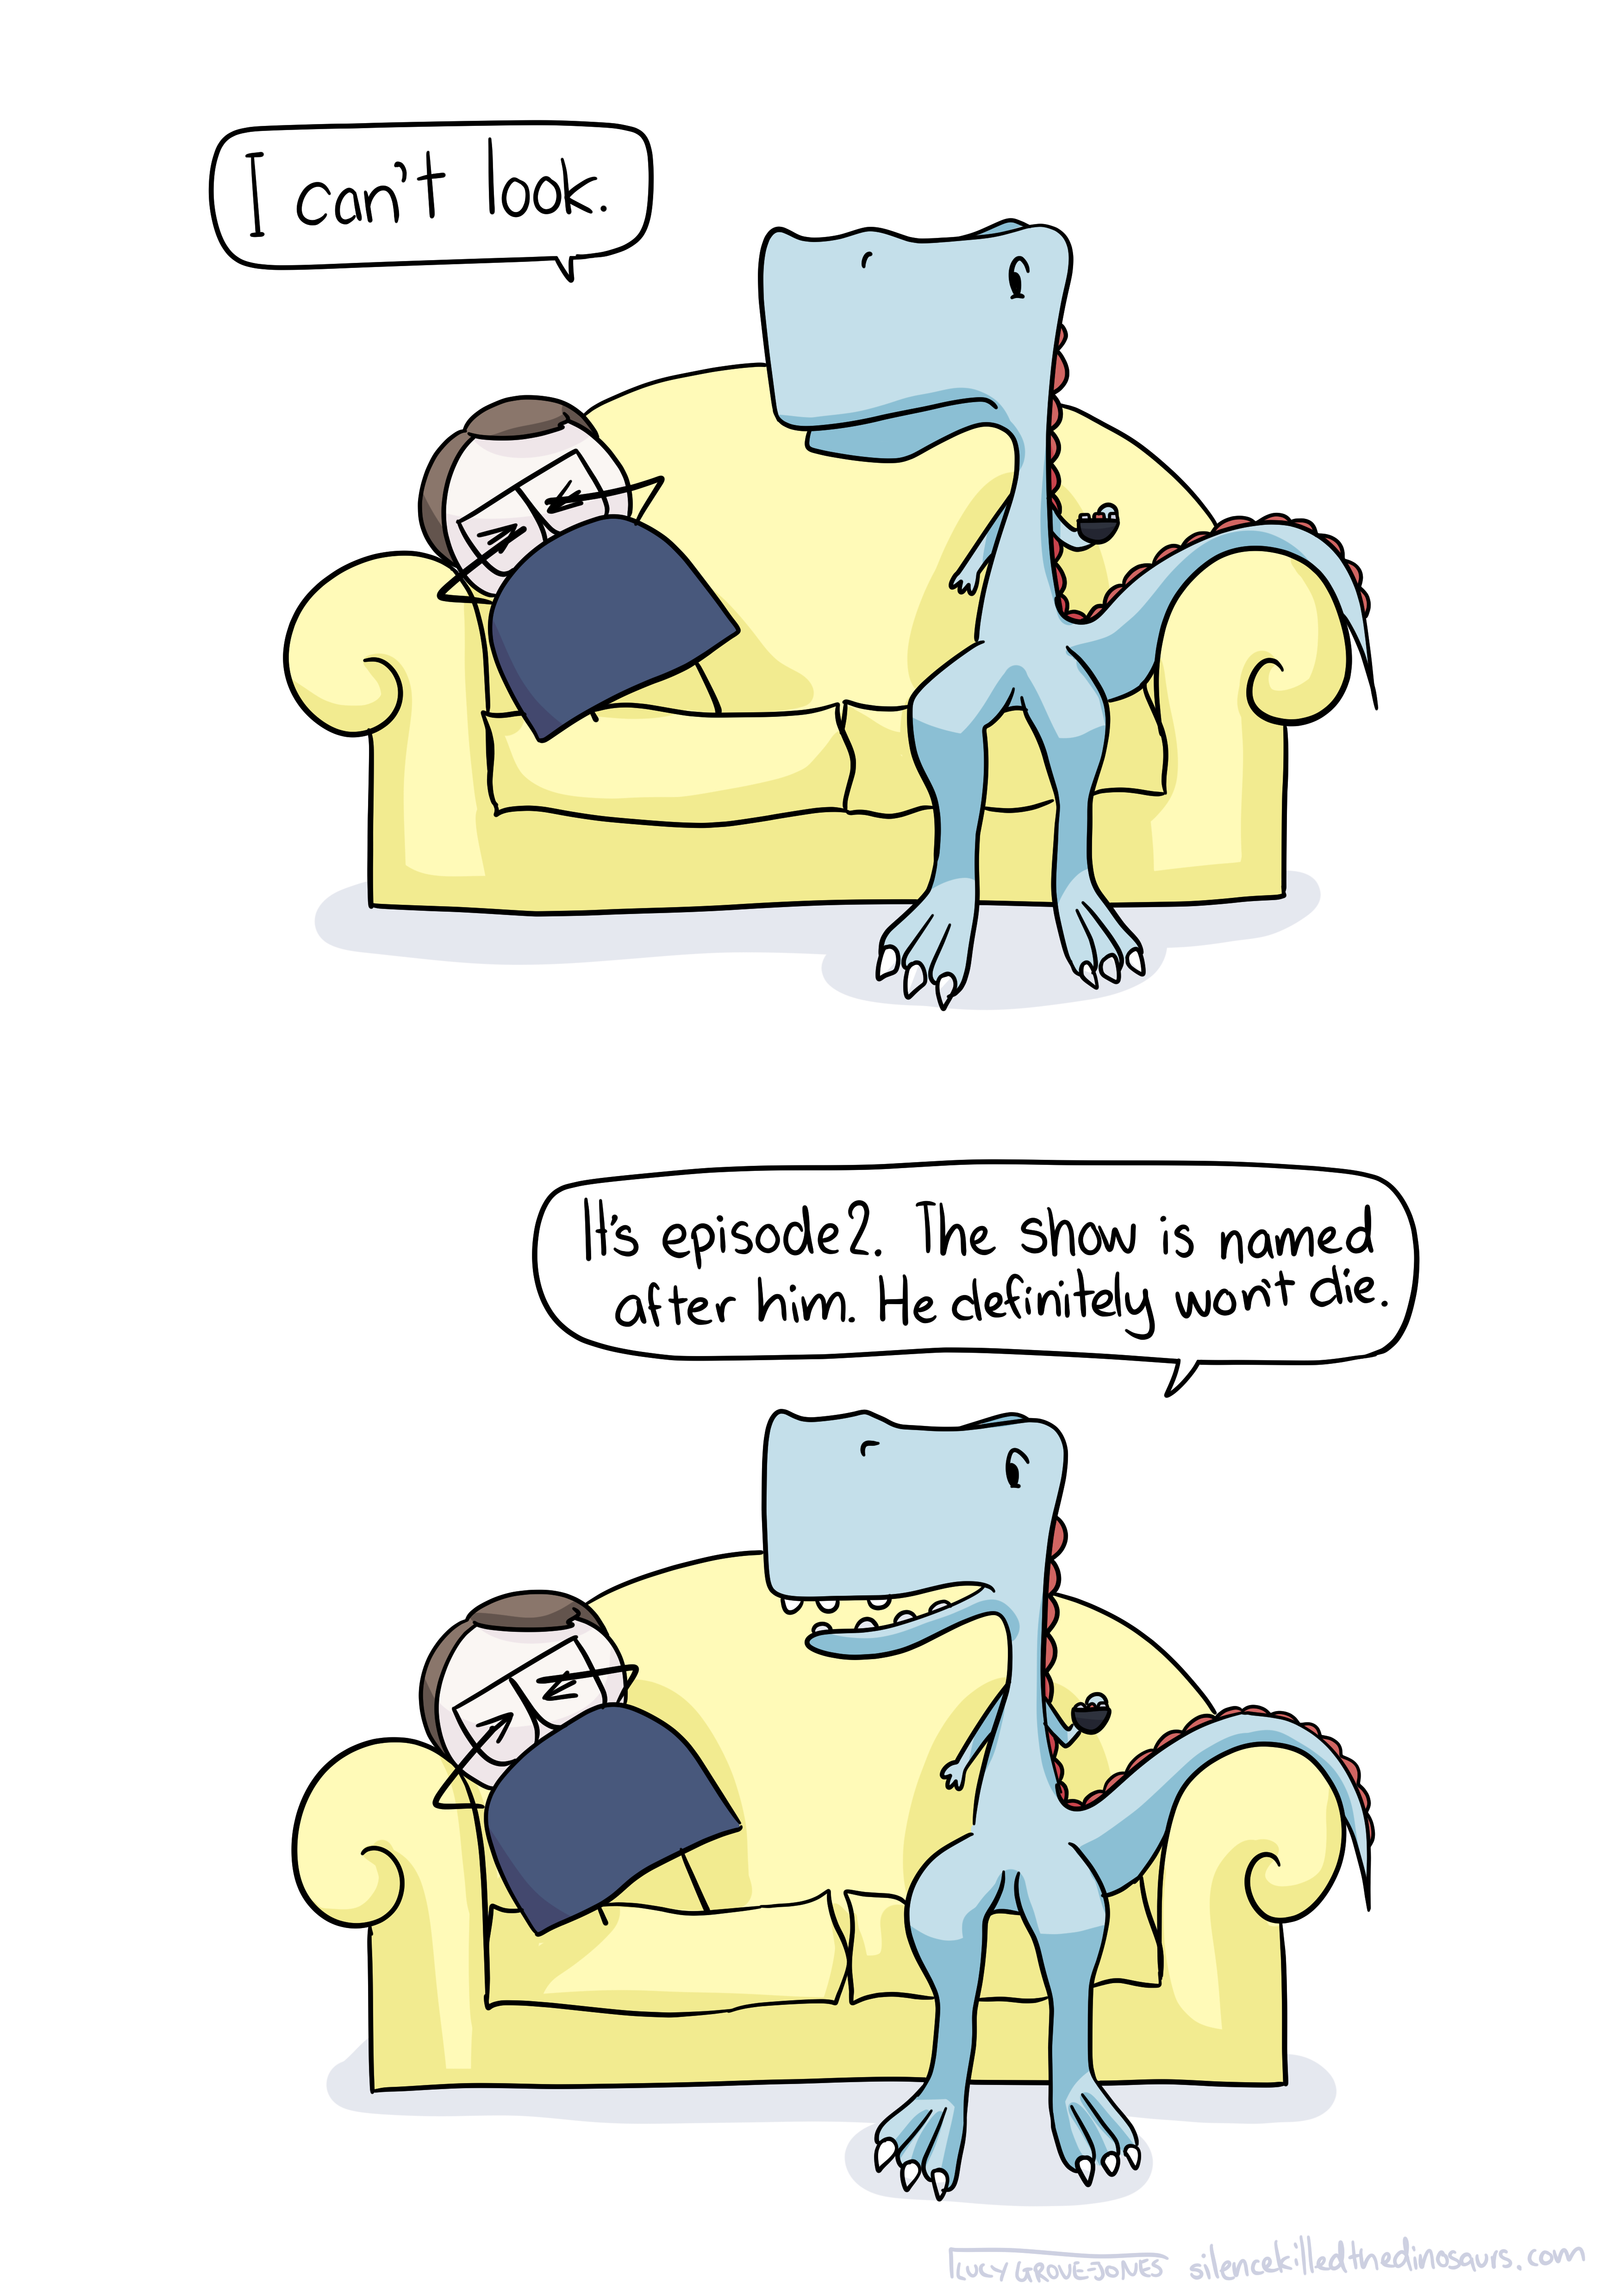 Comic Lucy sits on the couch with her dinosaur friend. Comic lucy is hunched up, covering her eyes. She says 'I can't look.' Her dinosaur friend says 'It's episode 2. The show is named after him. He definitely won't die.'